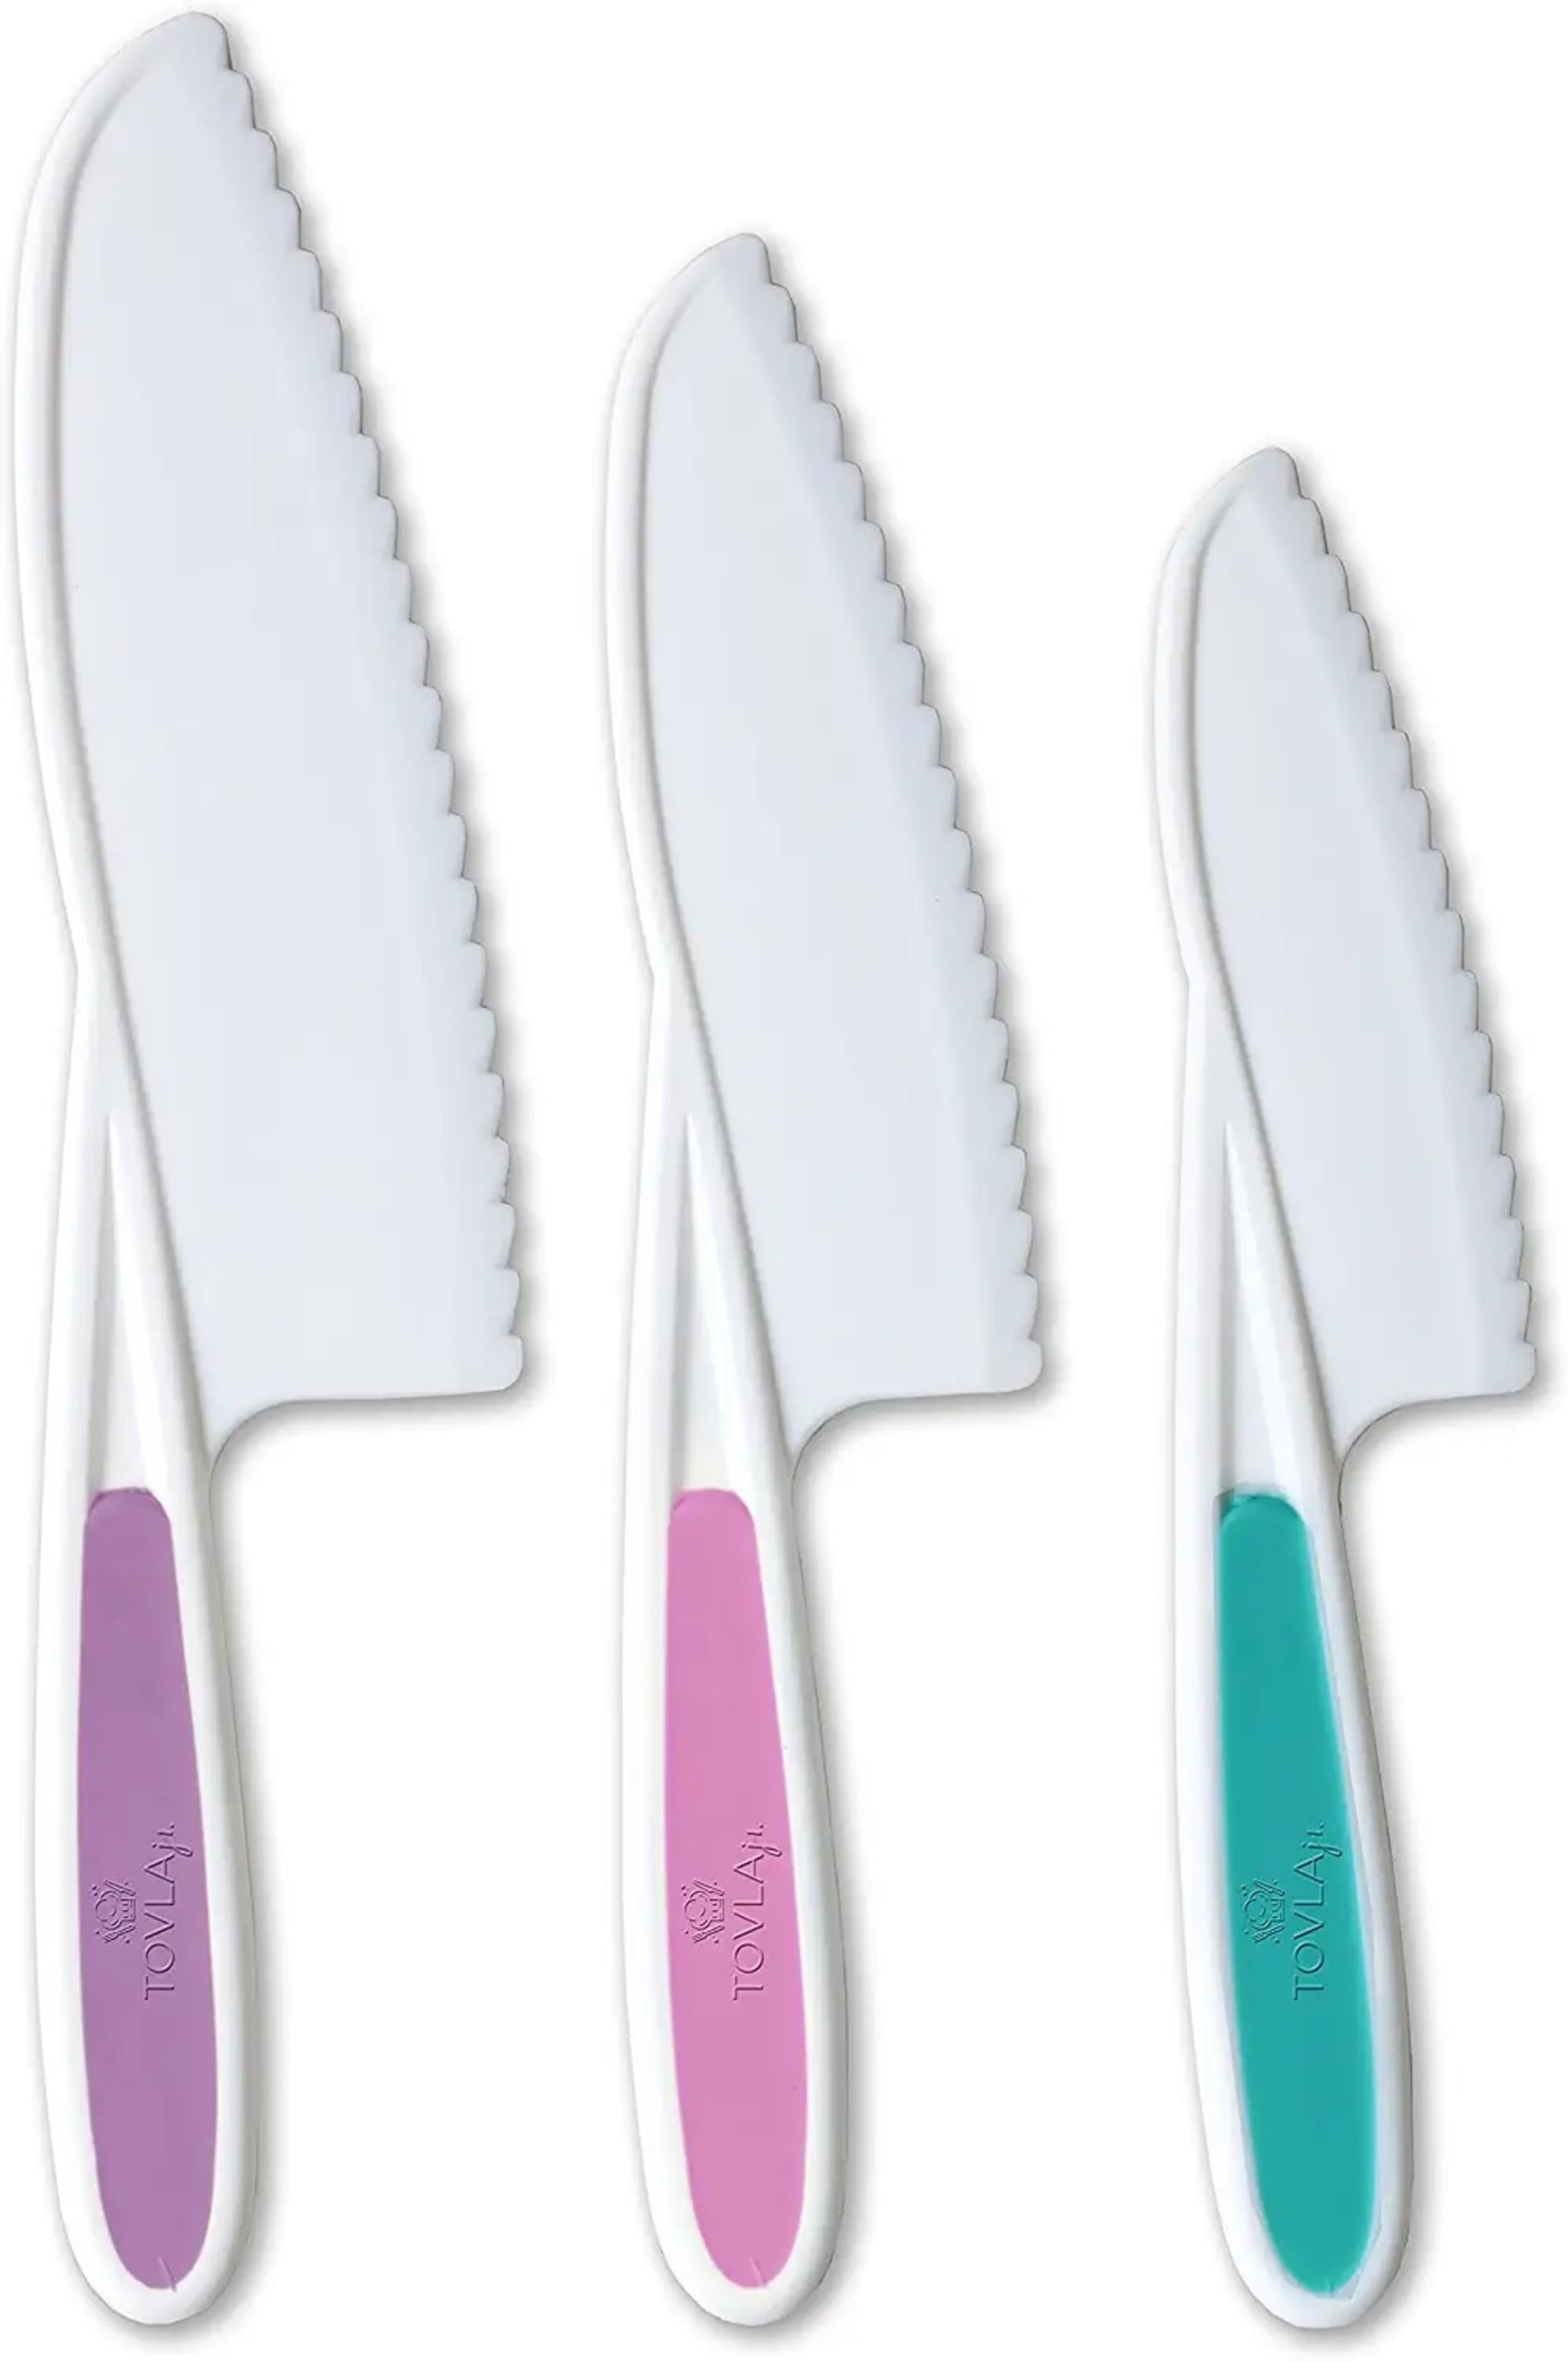  Mimi Nylon Kitchen Knife Set 3 Pieces Bundle with Joie Fruit  and Vegetable Wavy Chopper Knife, Stainless Steel Blade, Colors Vary :  Industrial & Scientific